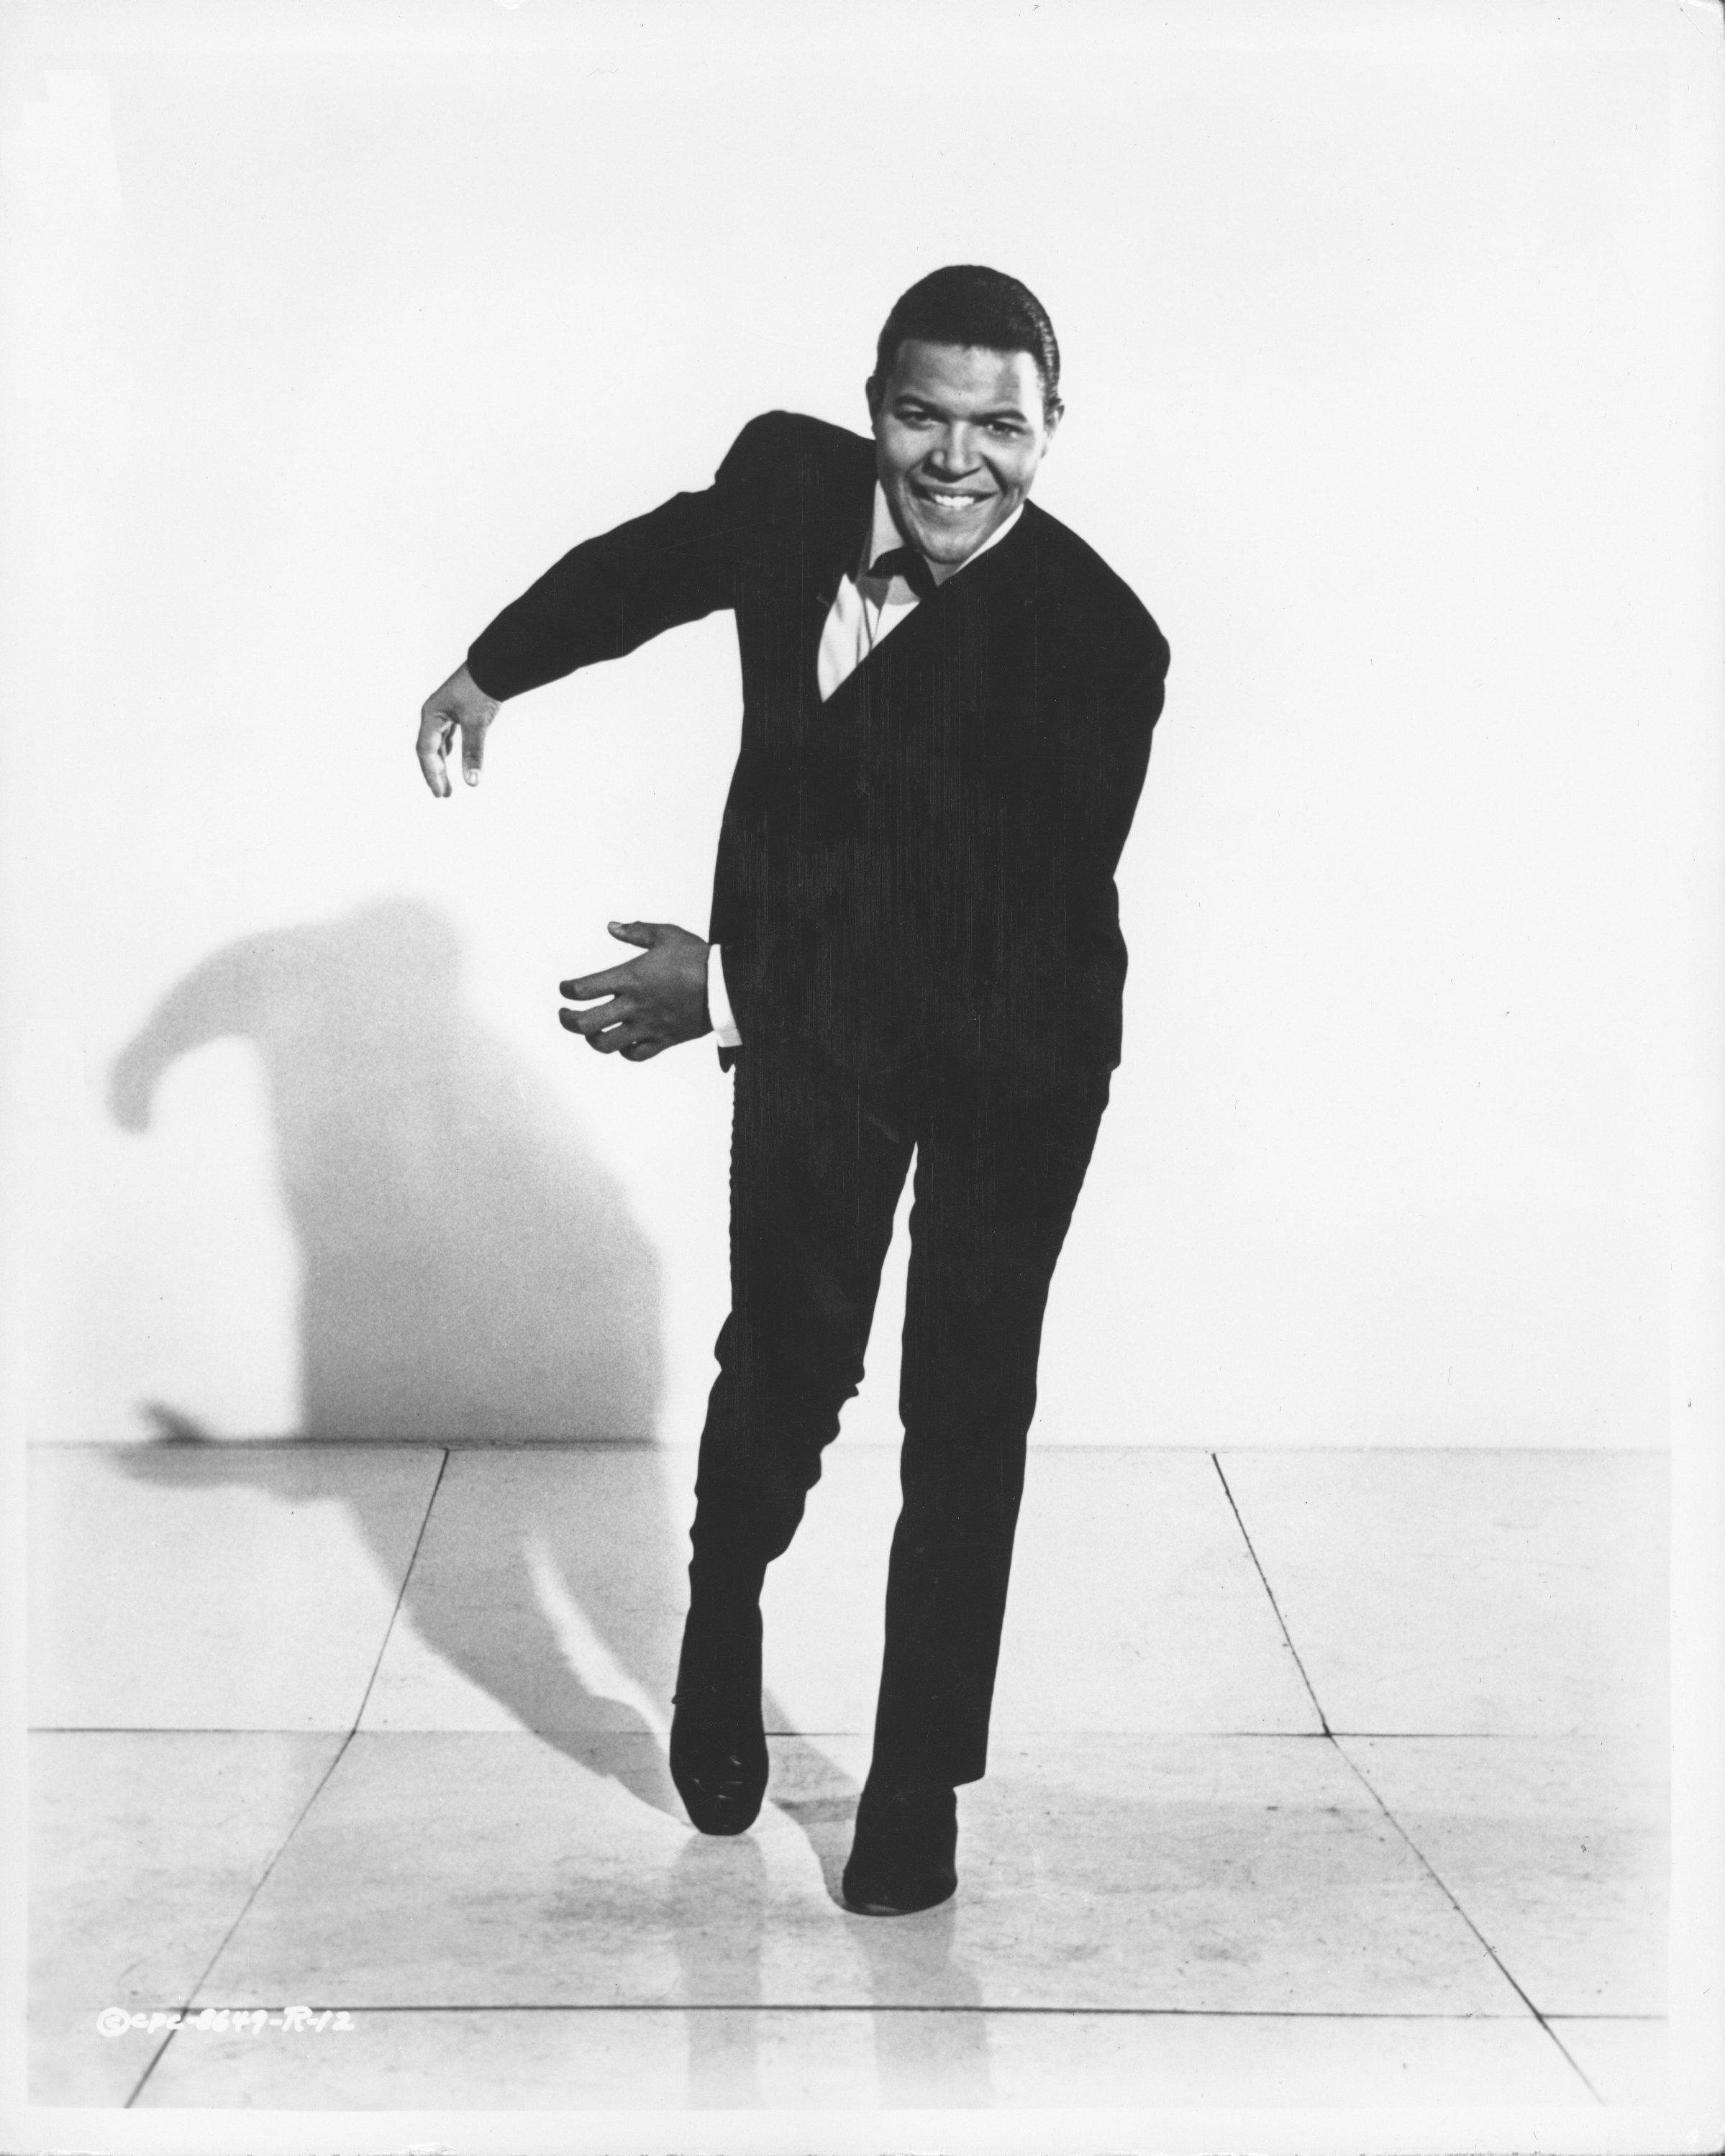 American rock 'n roll singer and dancer, Chubby Checker, in1960. | Source: Getty Images